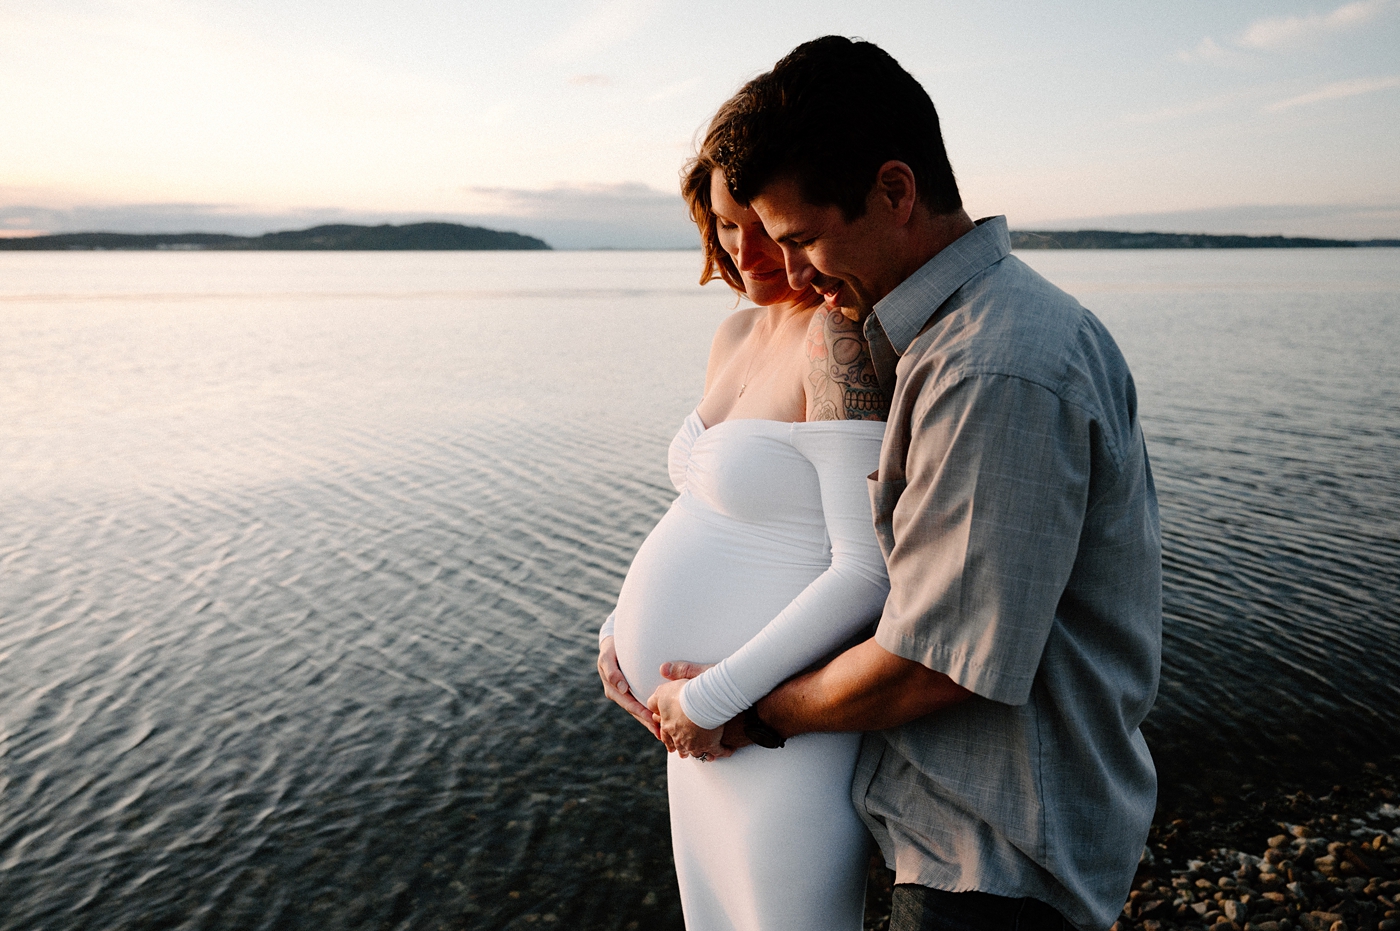 Dad embraces mom's pregnant belly from behind. Image by PNW maternity photographer Meg Newton.